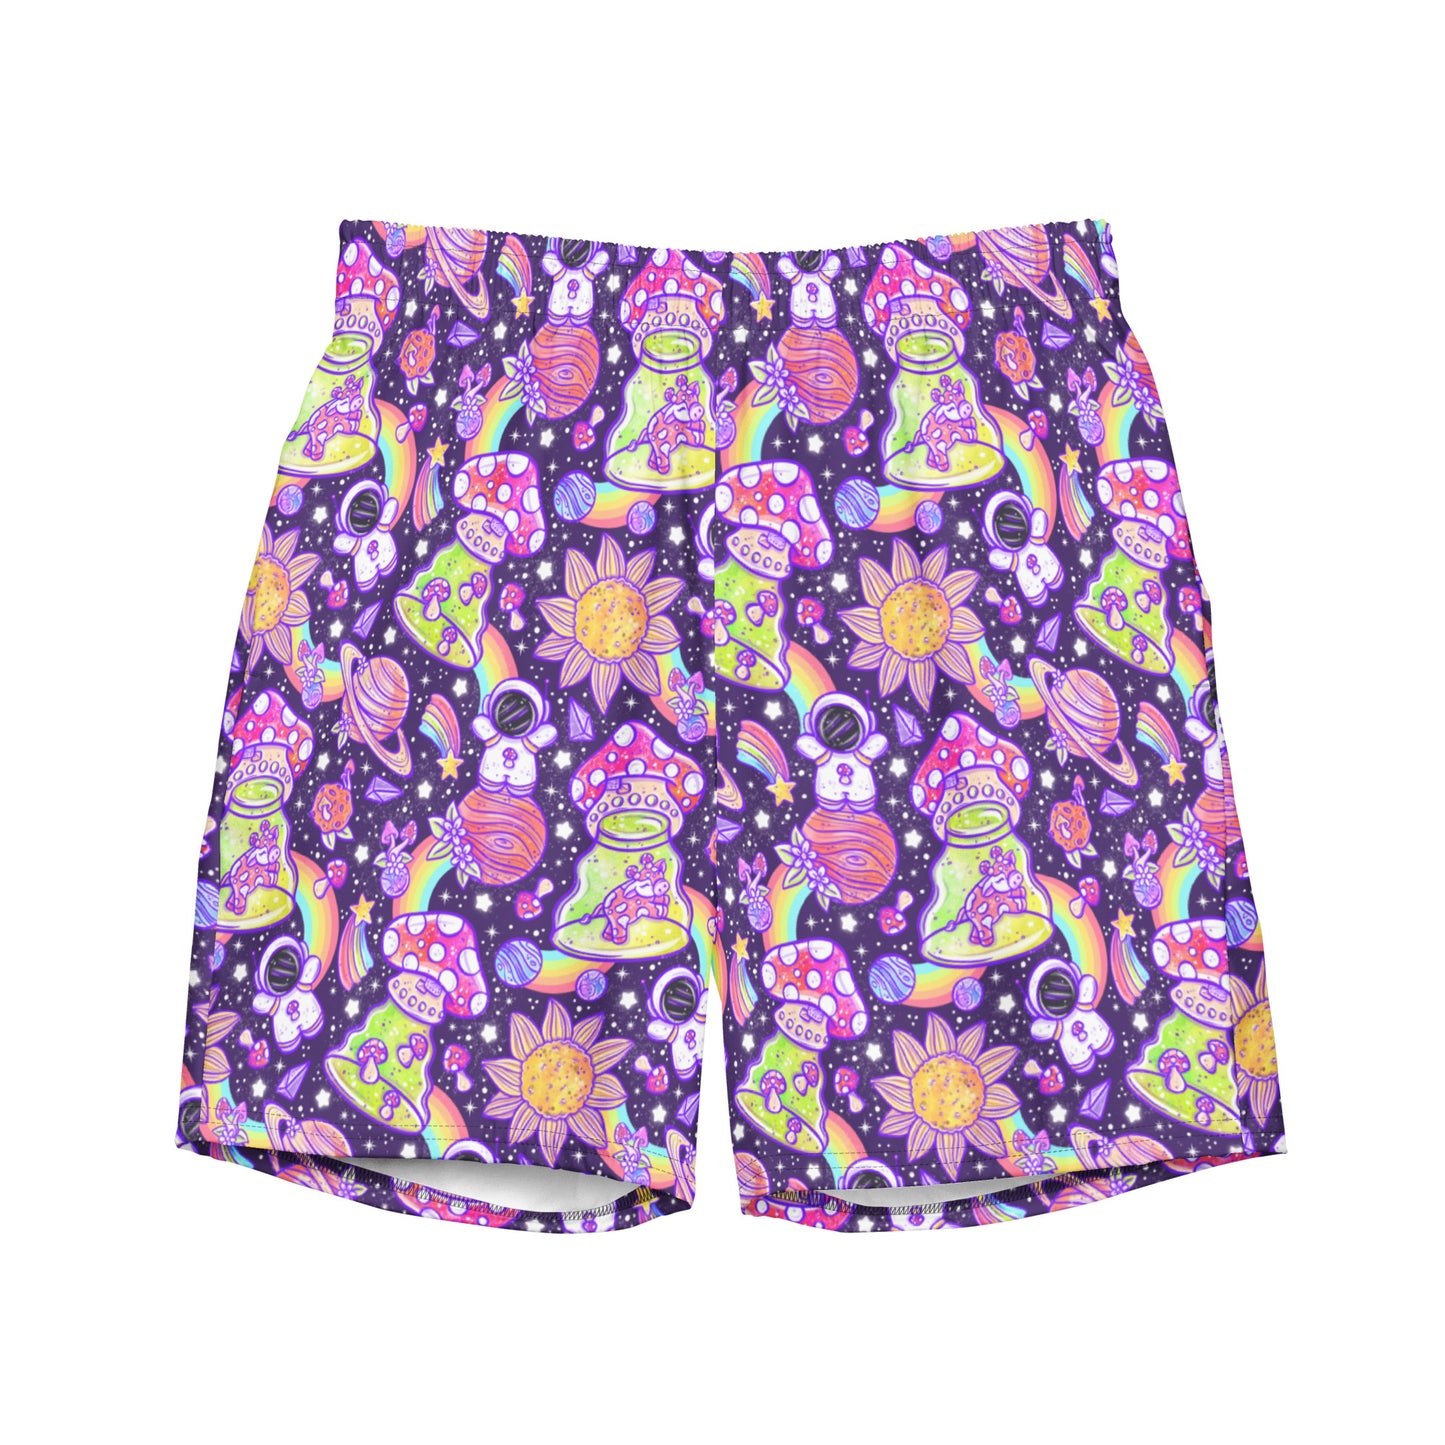 Space Shrooms Men's swim trunks, rave bottoms, Available in plus size